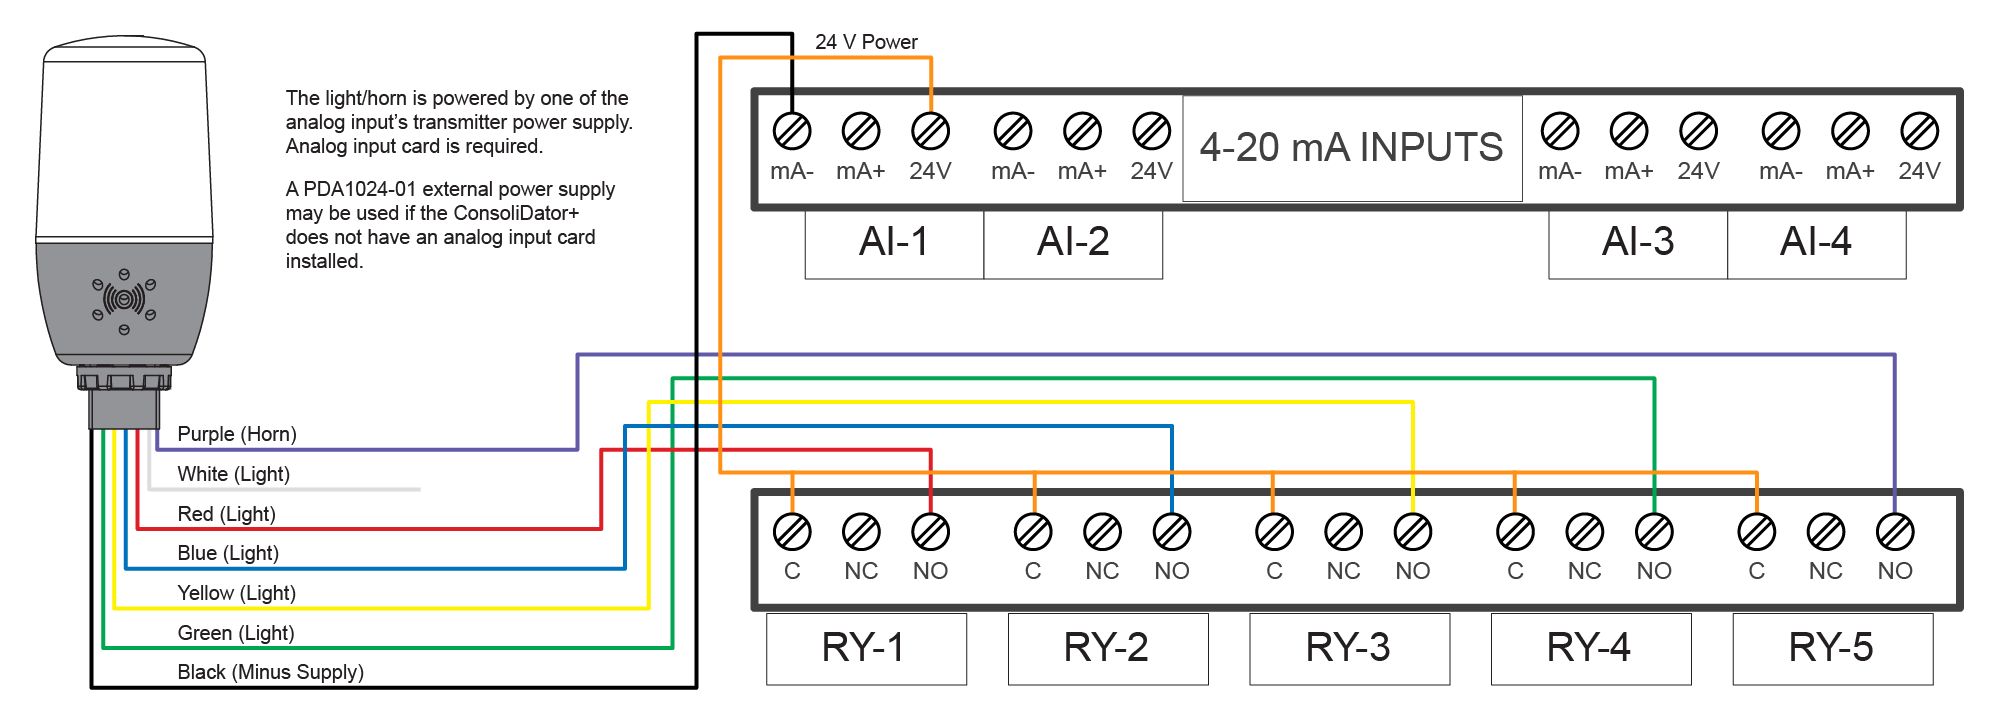 Wiring Connections for PDA-LH5C Models Using ConsoliDator+ Controller Internal Power Supply